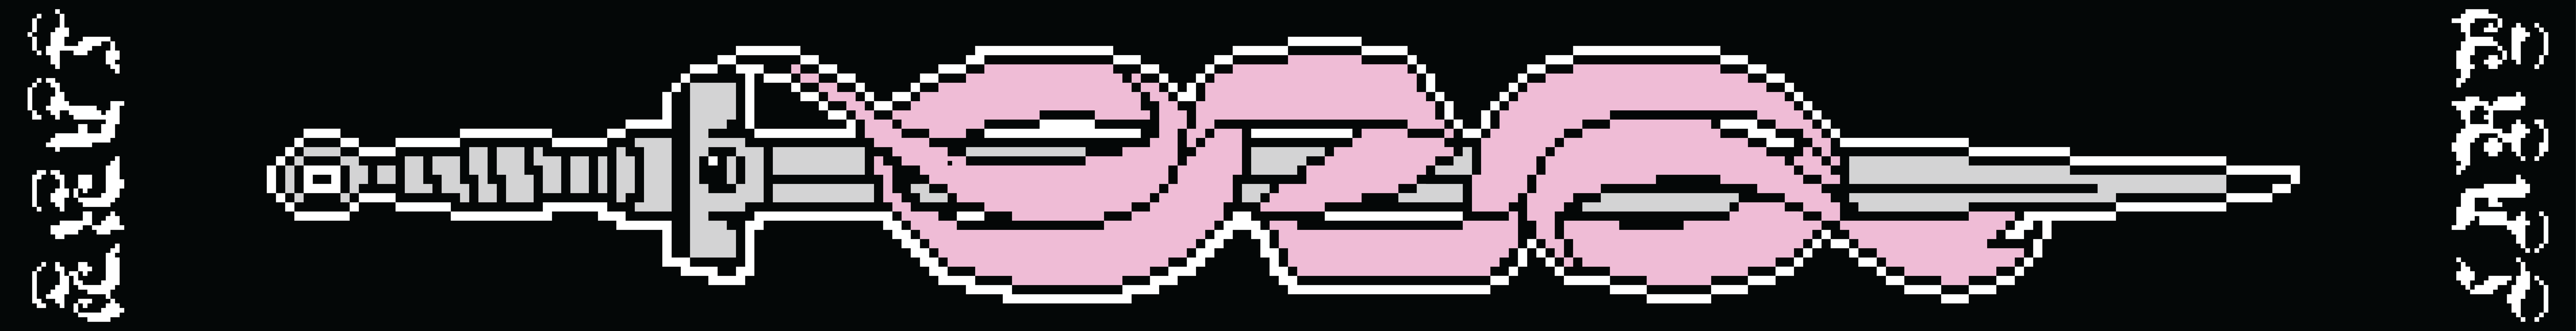 A scarf design of a grey sword with a pink ribbon wrapped around it.